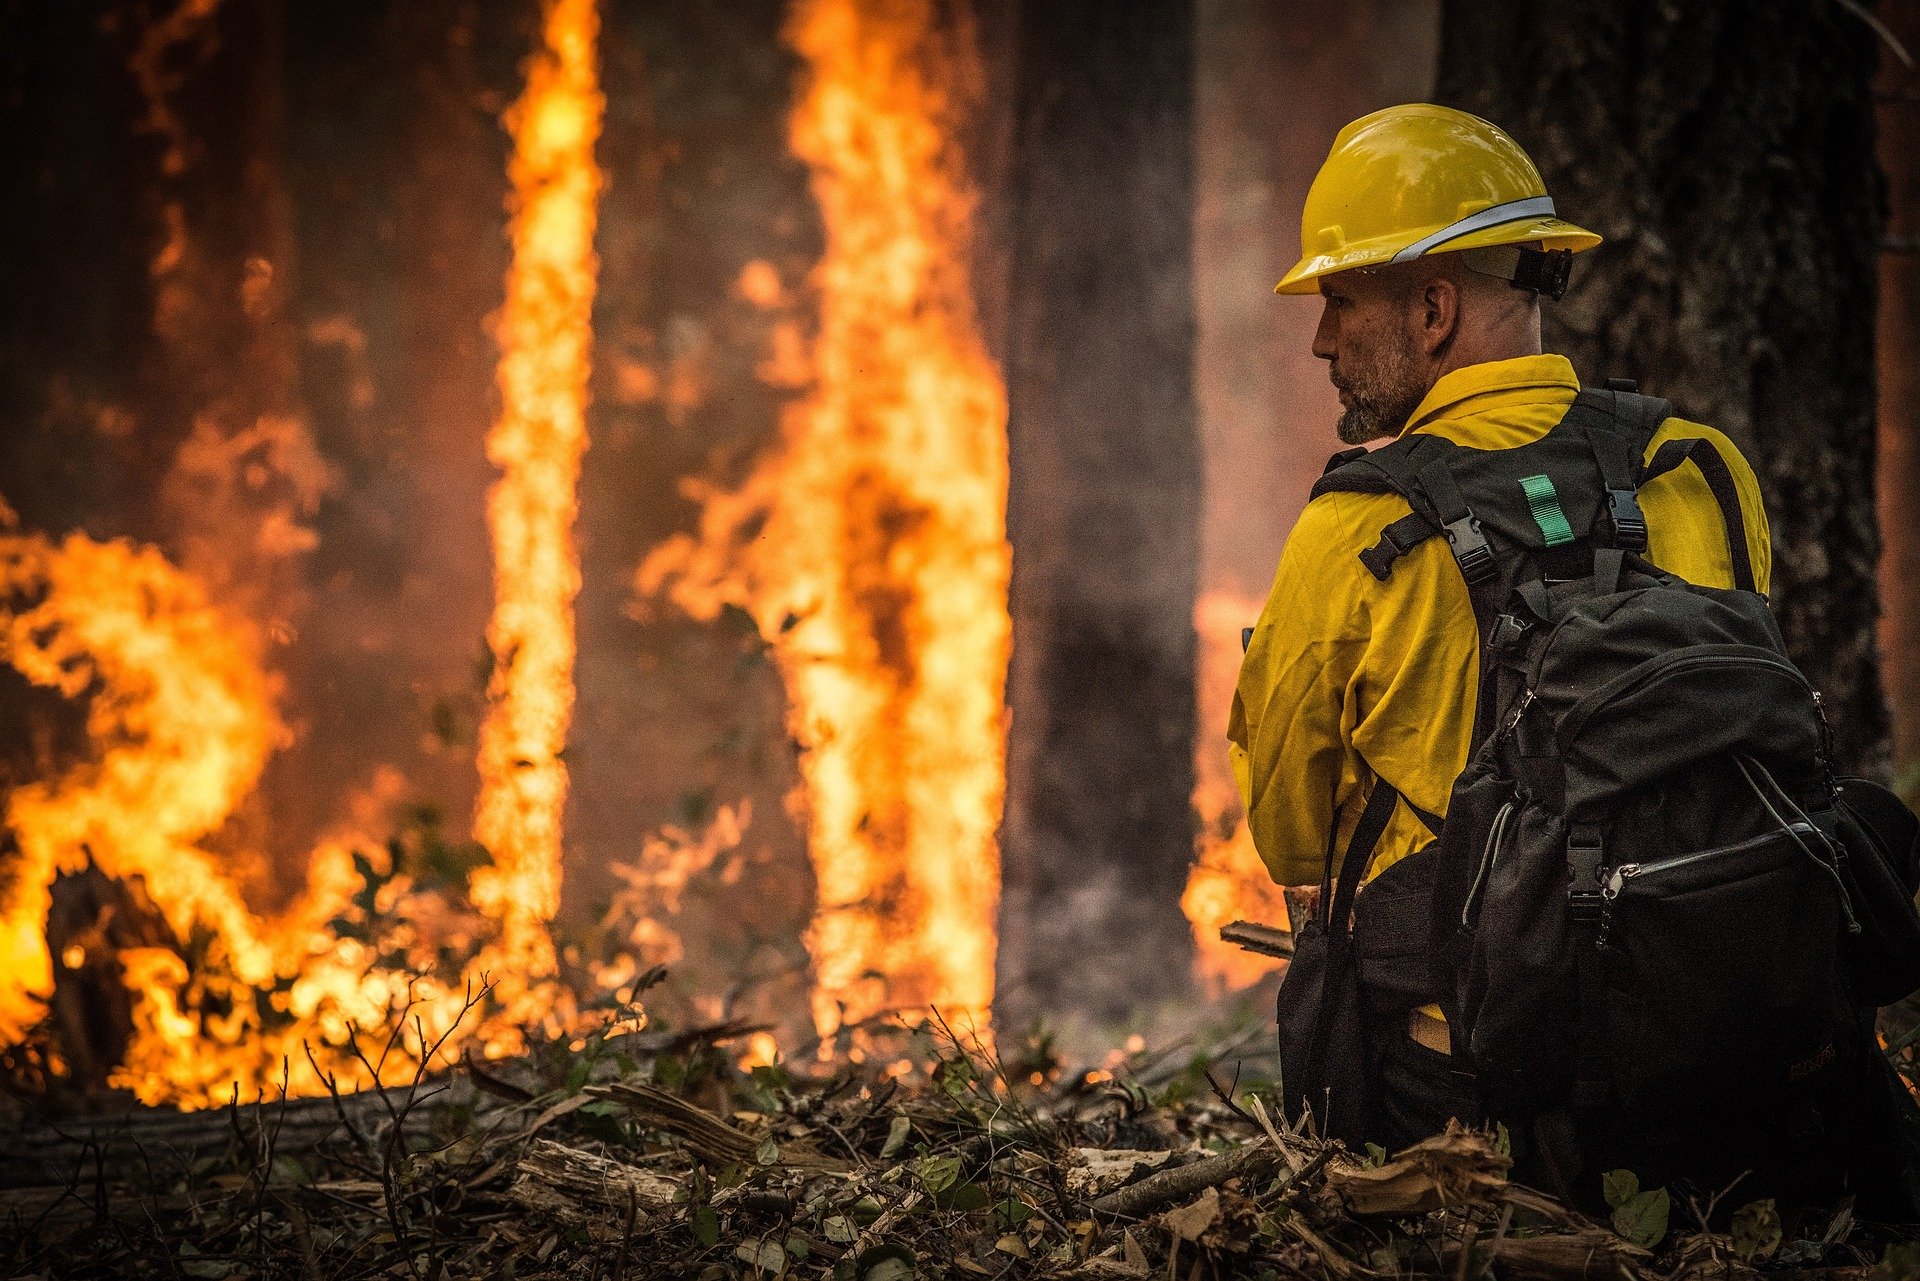 Wildfire and utility experts request government support in wildfire prevention